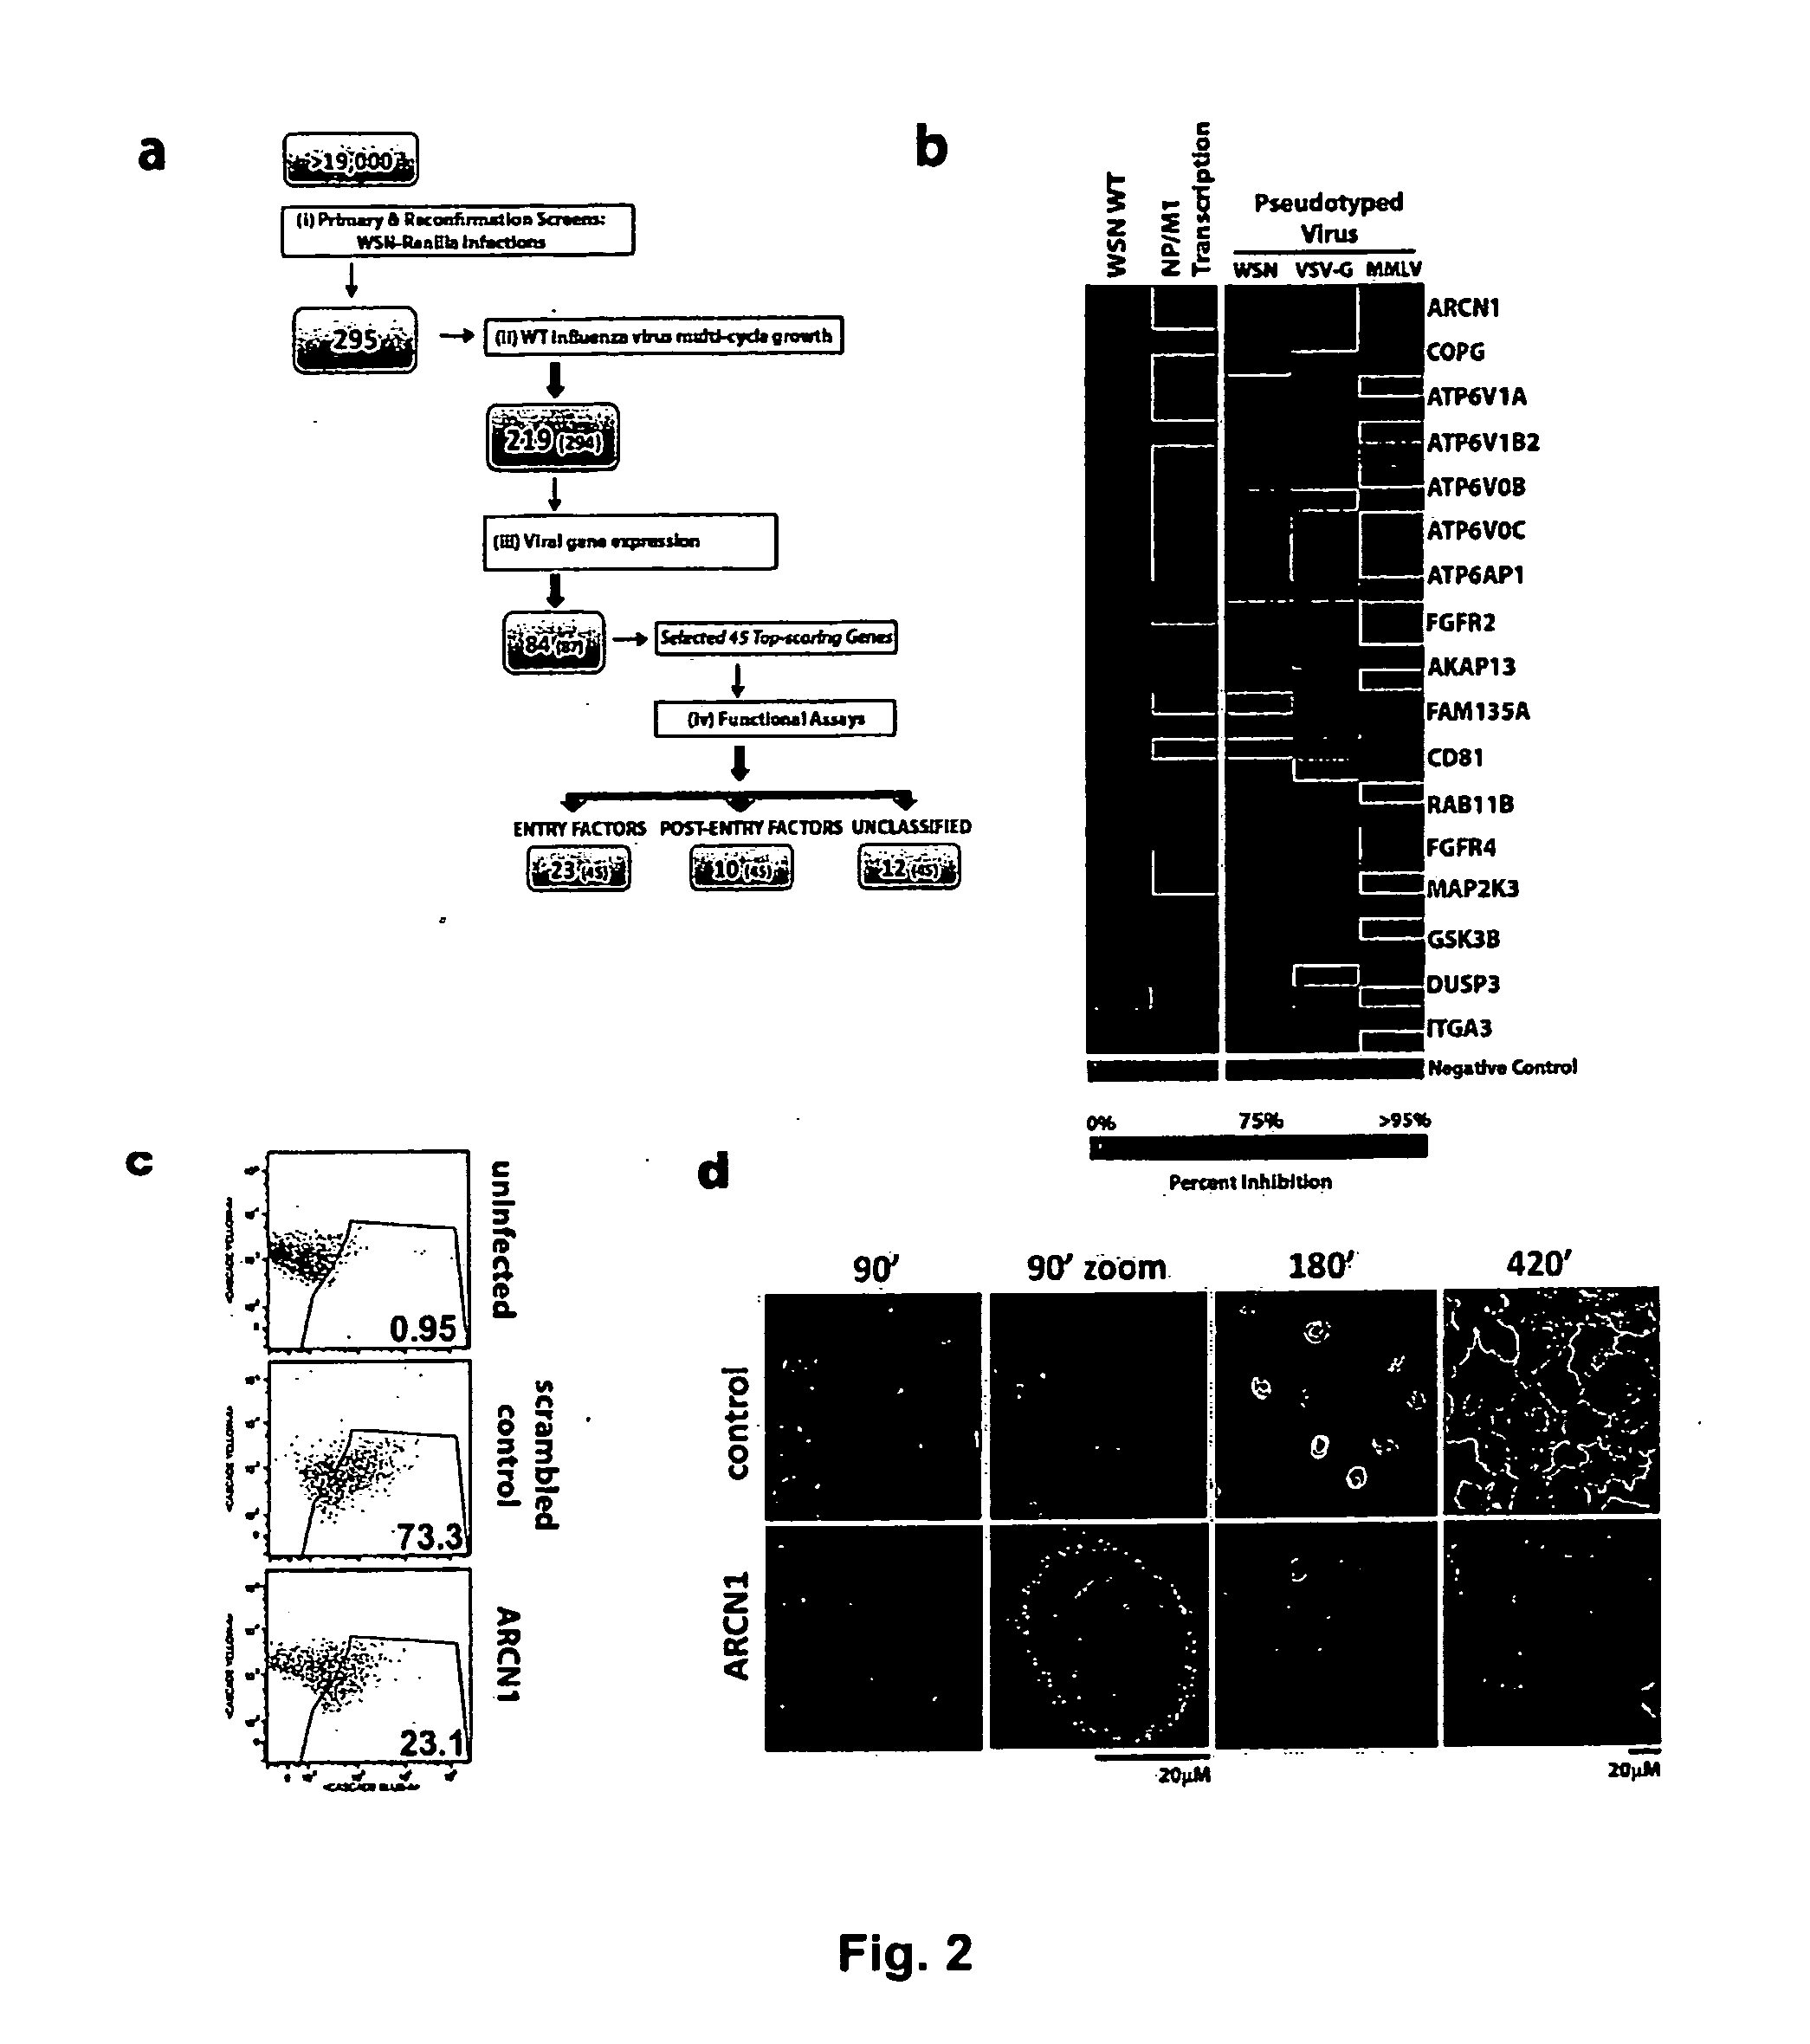 Compositions and Methods for Inhibiting Human Host Factors Required for Influenza Virus Replication